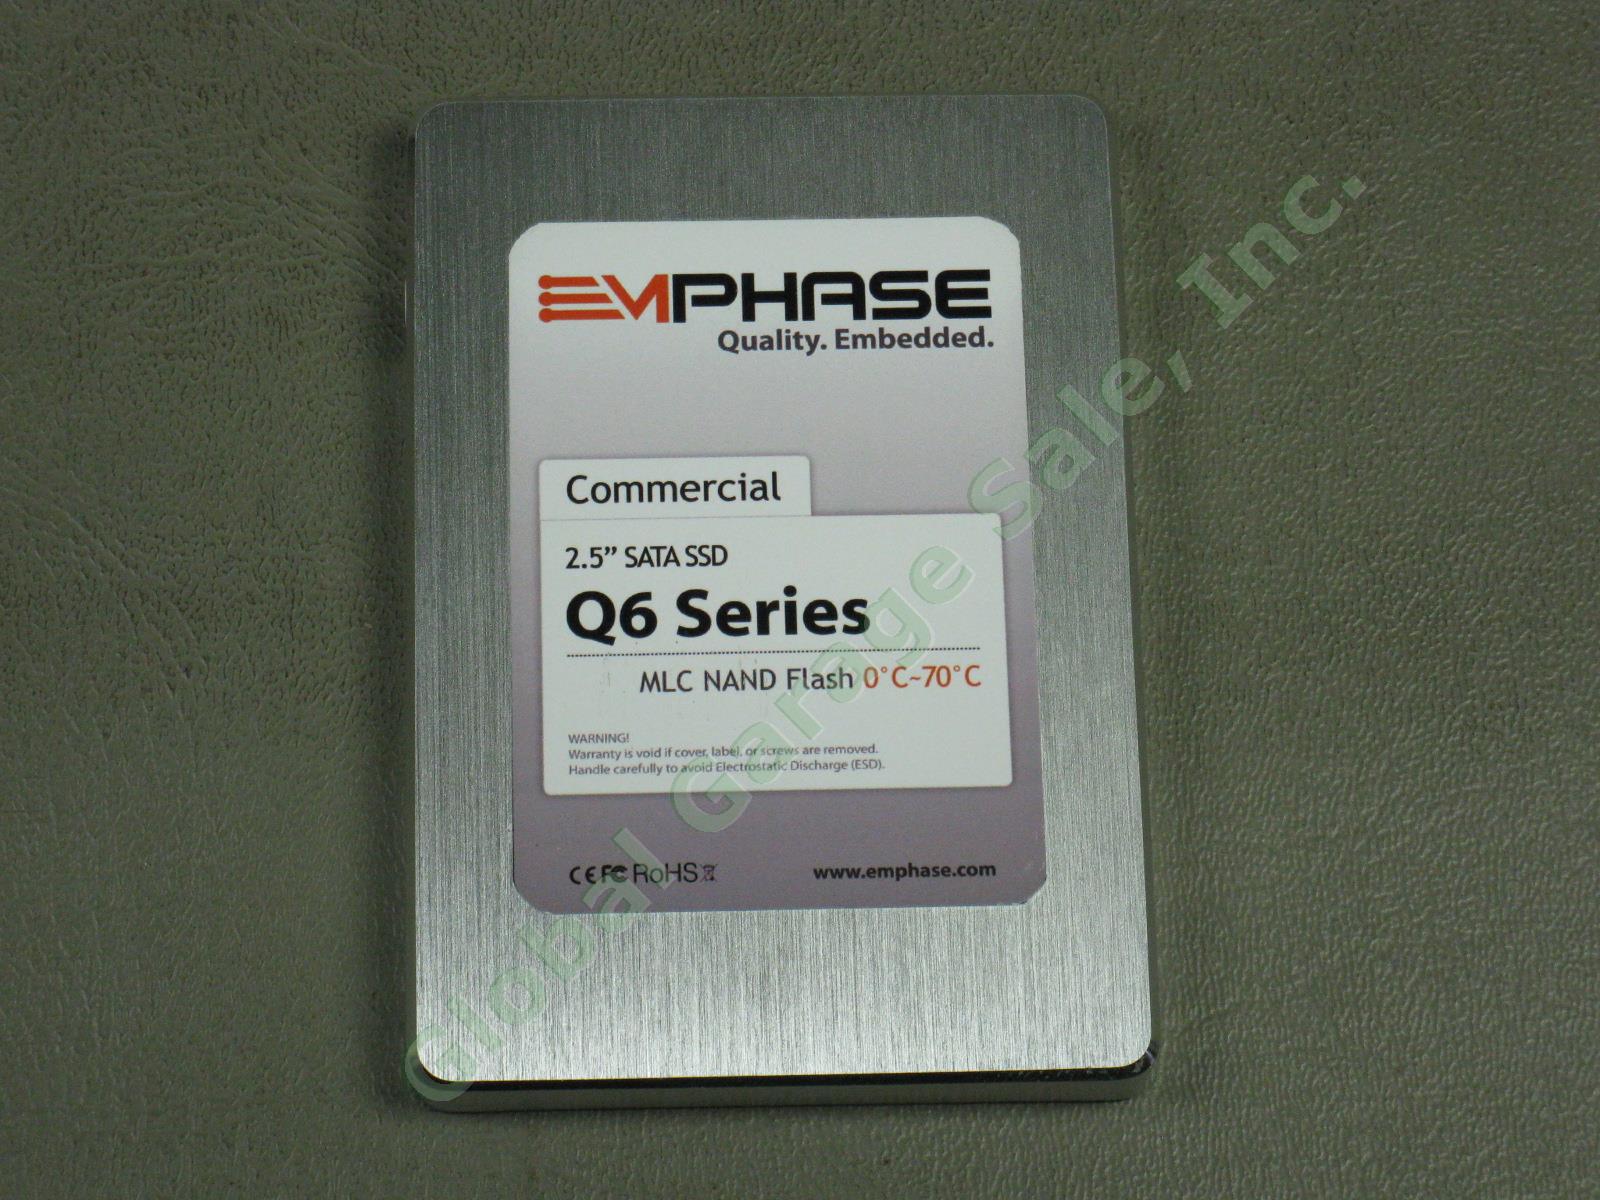 10 Emphase 60GB SSD SATA III Q6 Commercial 2.5 MLC NAND Solid State Drive Lot 2